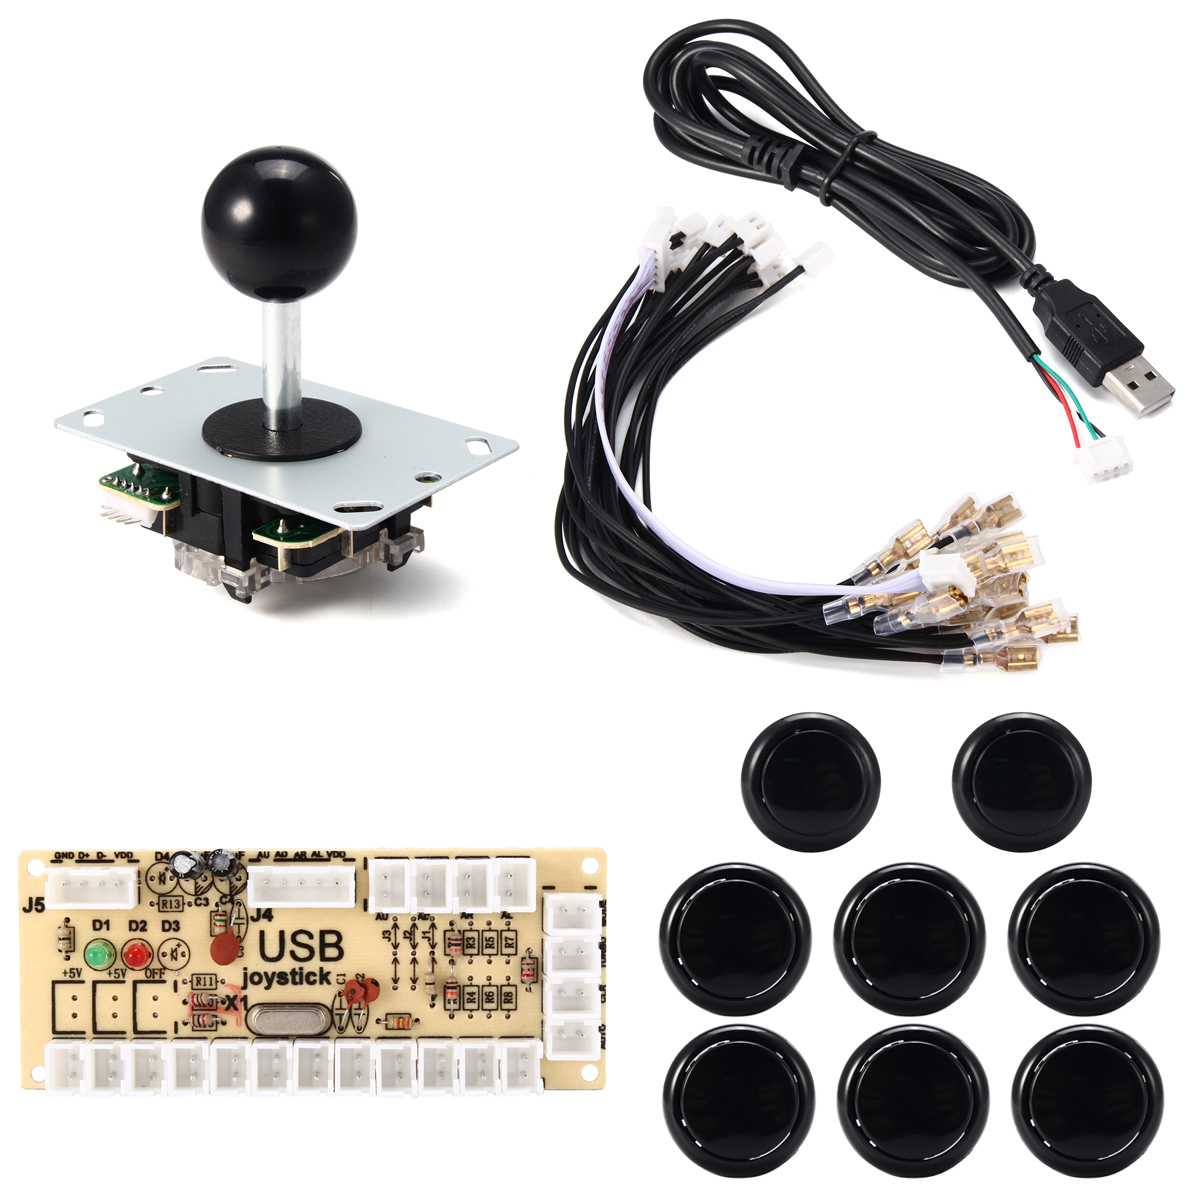 Joystick Push Button Game Controller DIY Kit for Arcade Fighting Video Game PC 11